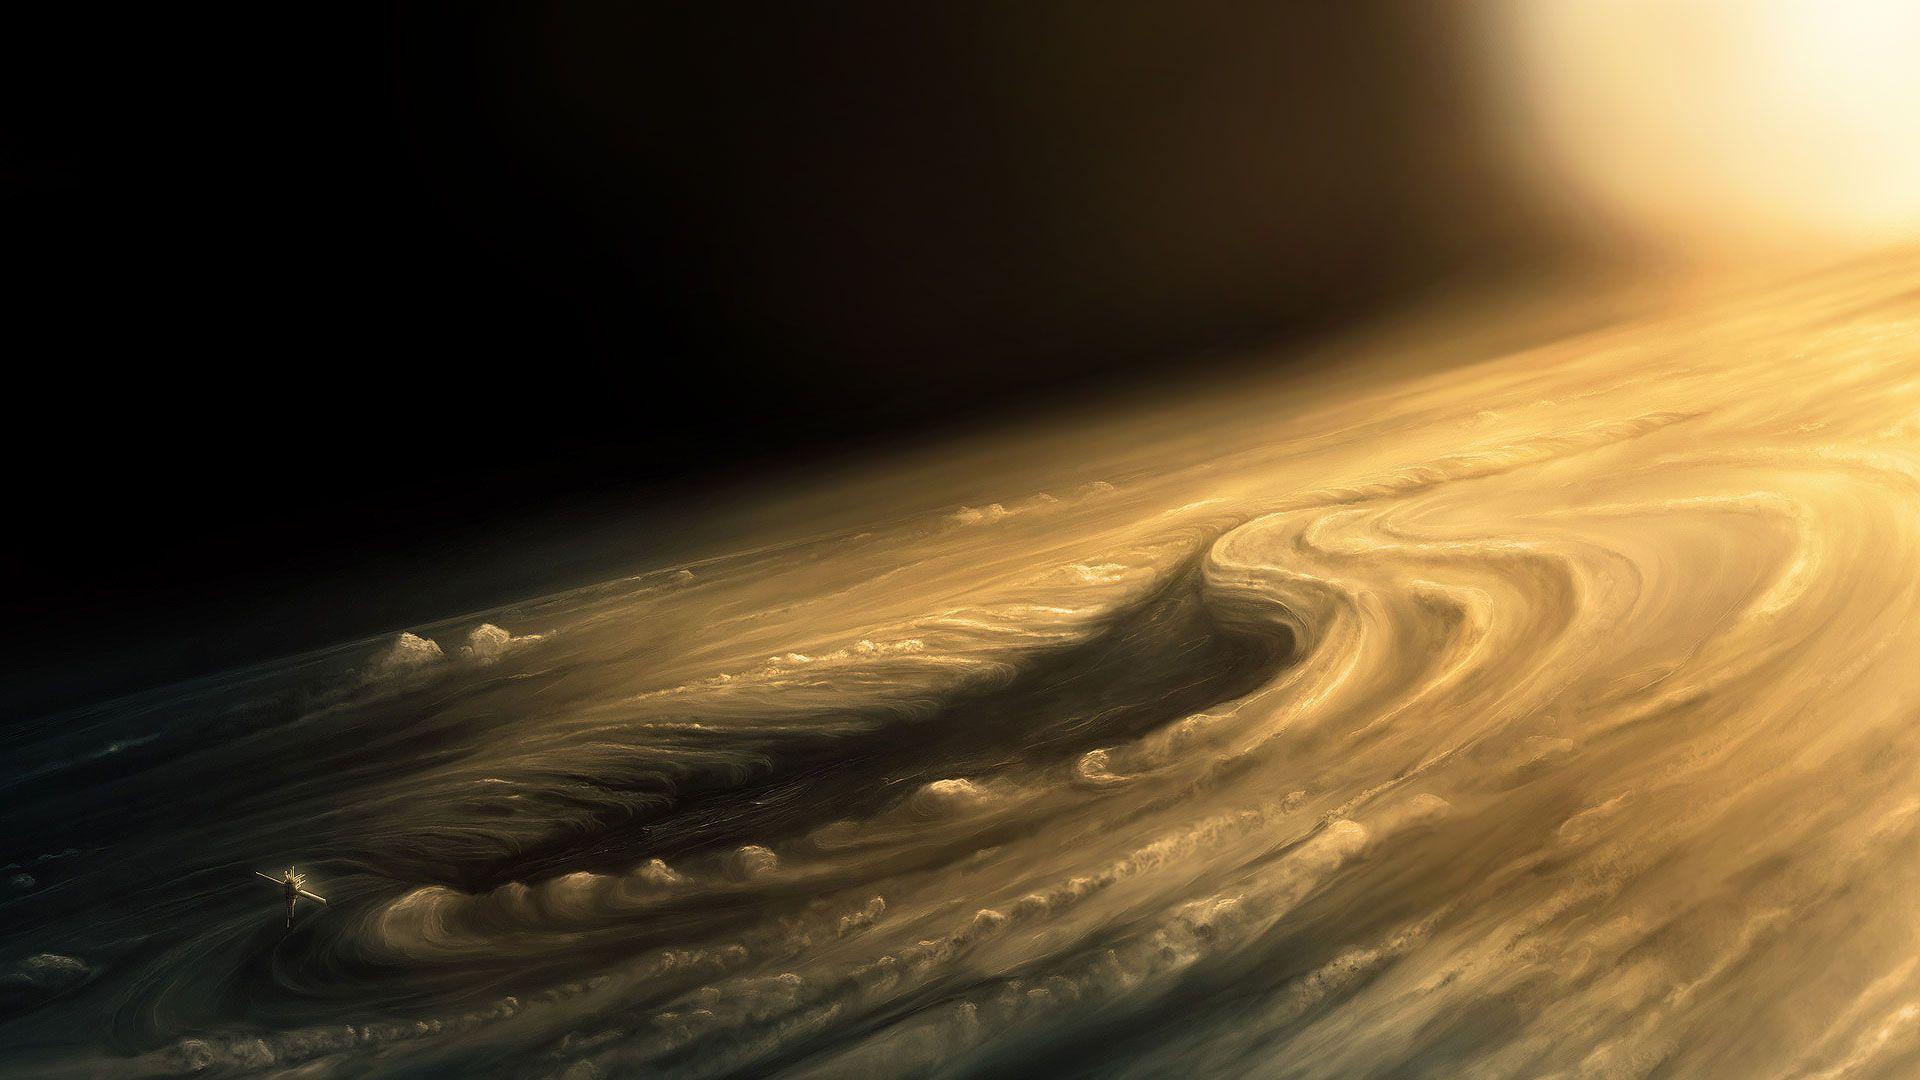 Jupiter Surface Painting Wallpaper Wide or HD